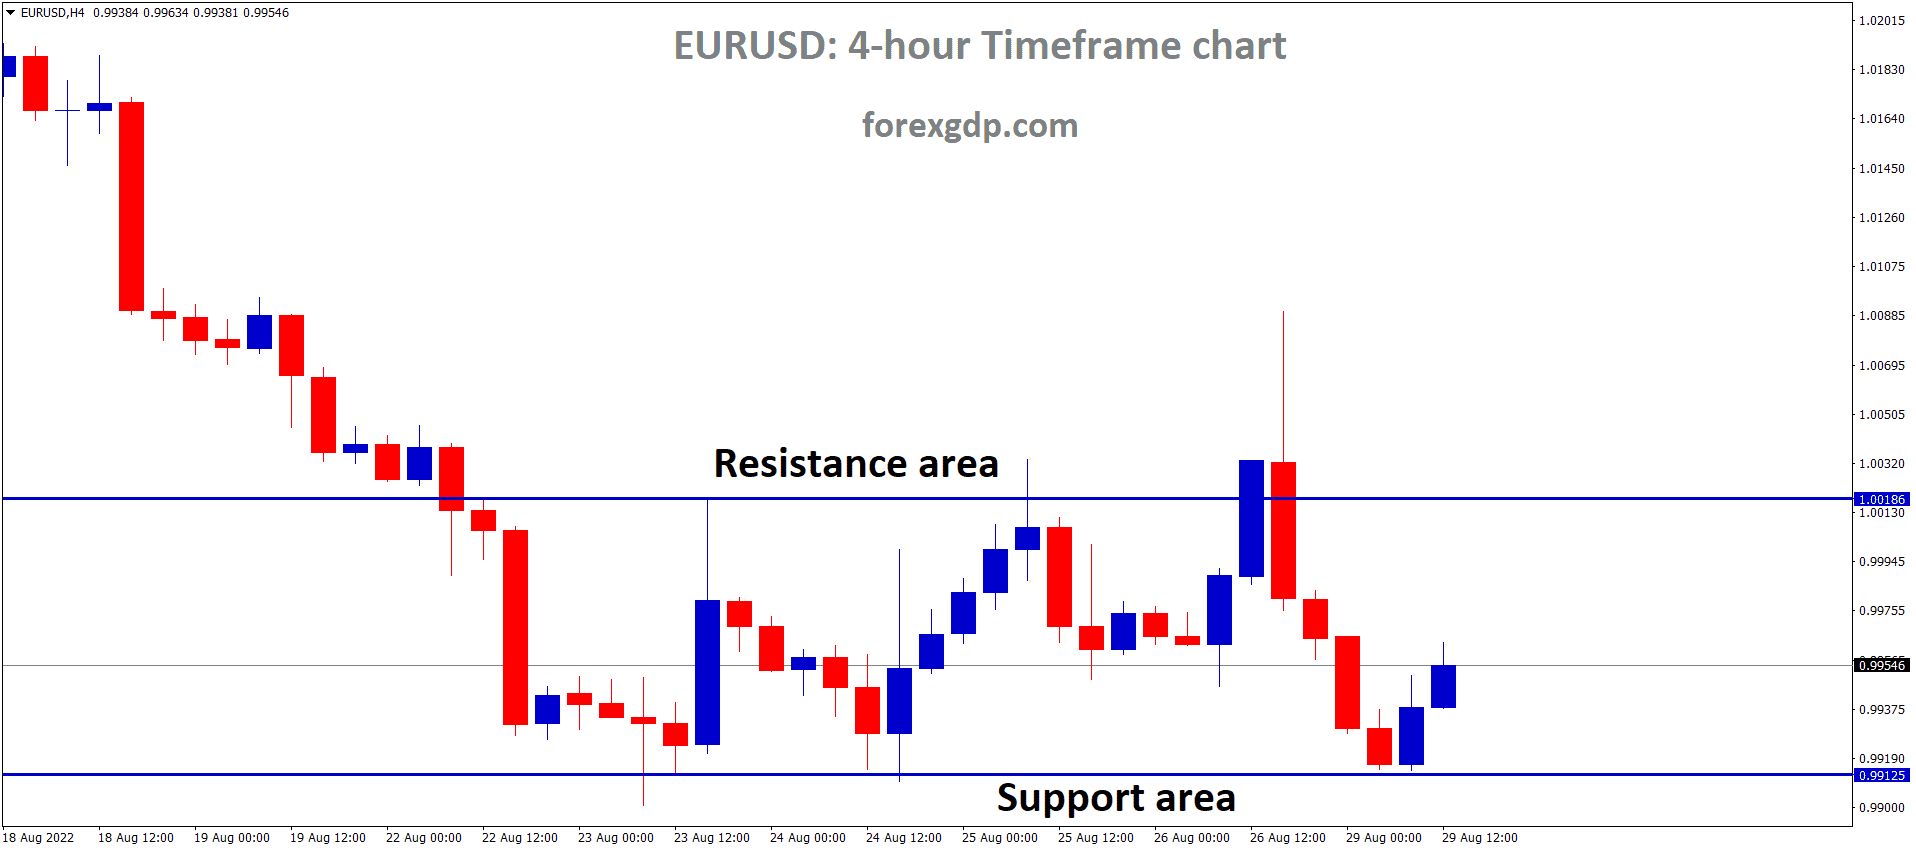 EURUSD is moving in the Box Pattern and the Market has rebounded from the horizontal support area of the pattern